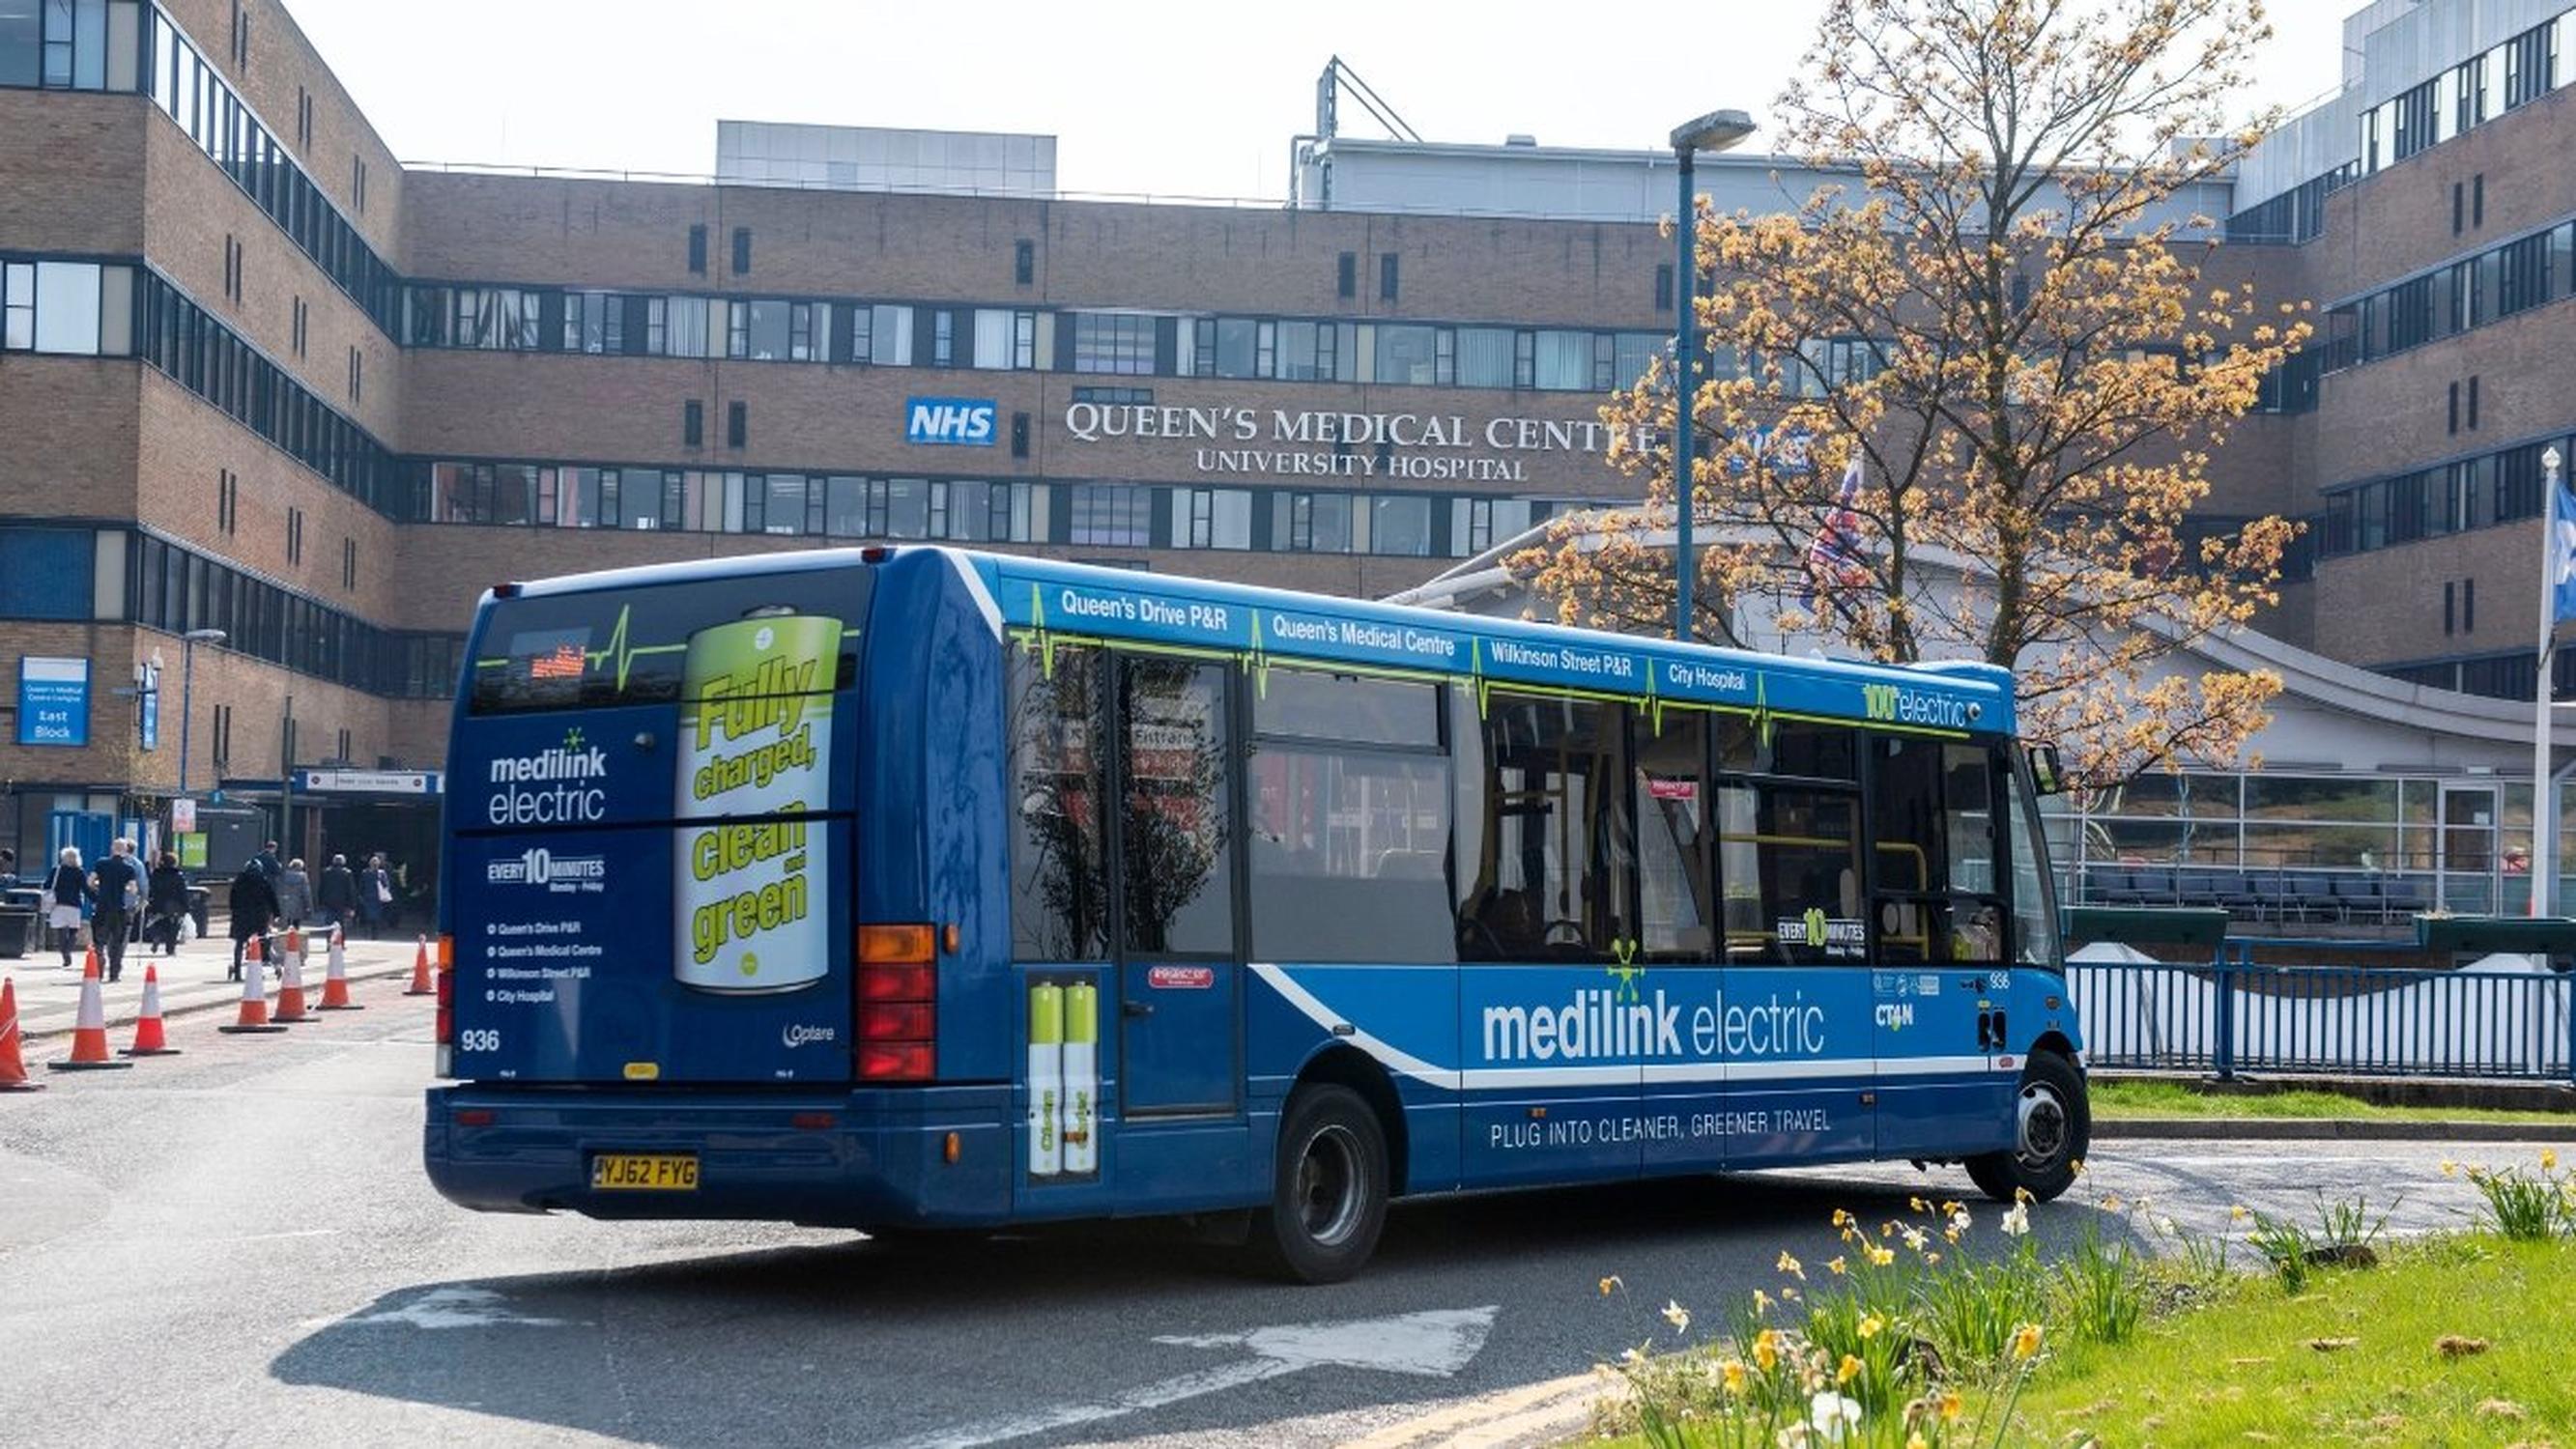 City council funding for the Medilink bus service in Nottingham is set to end under the financial retrenchment proposals